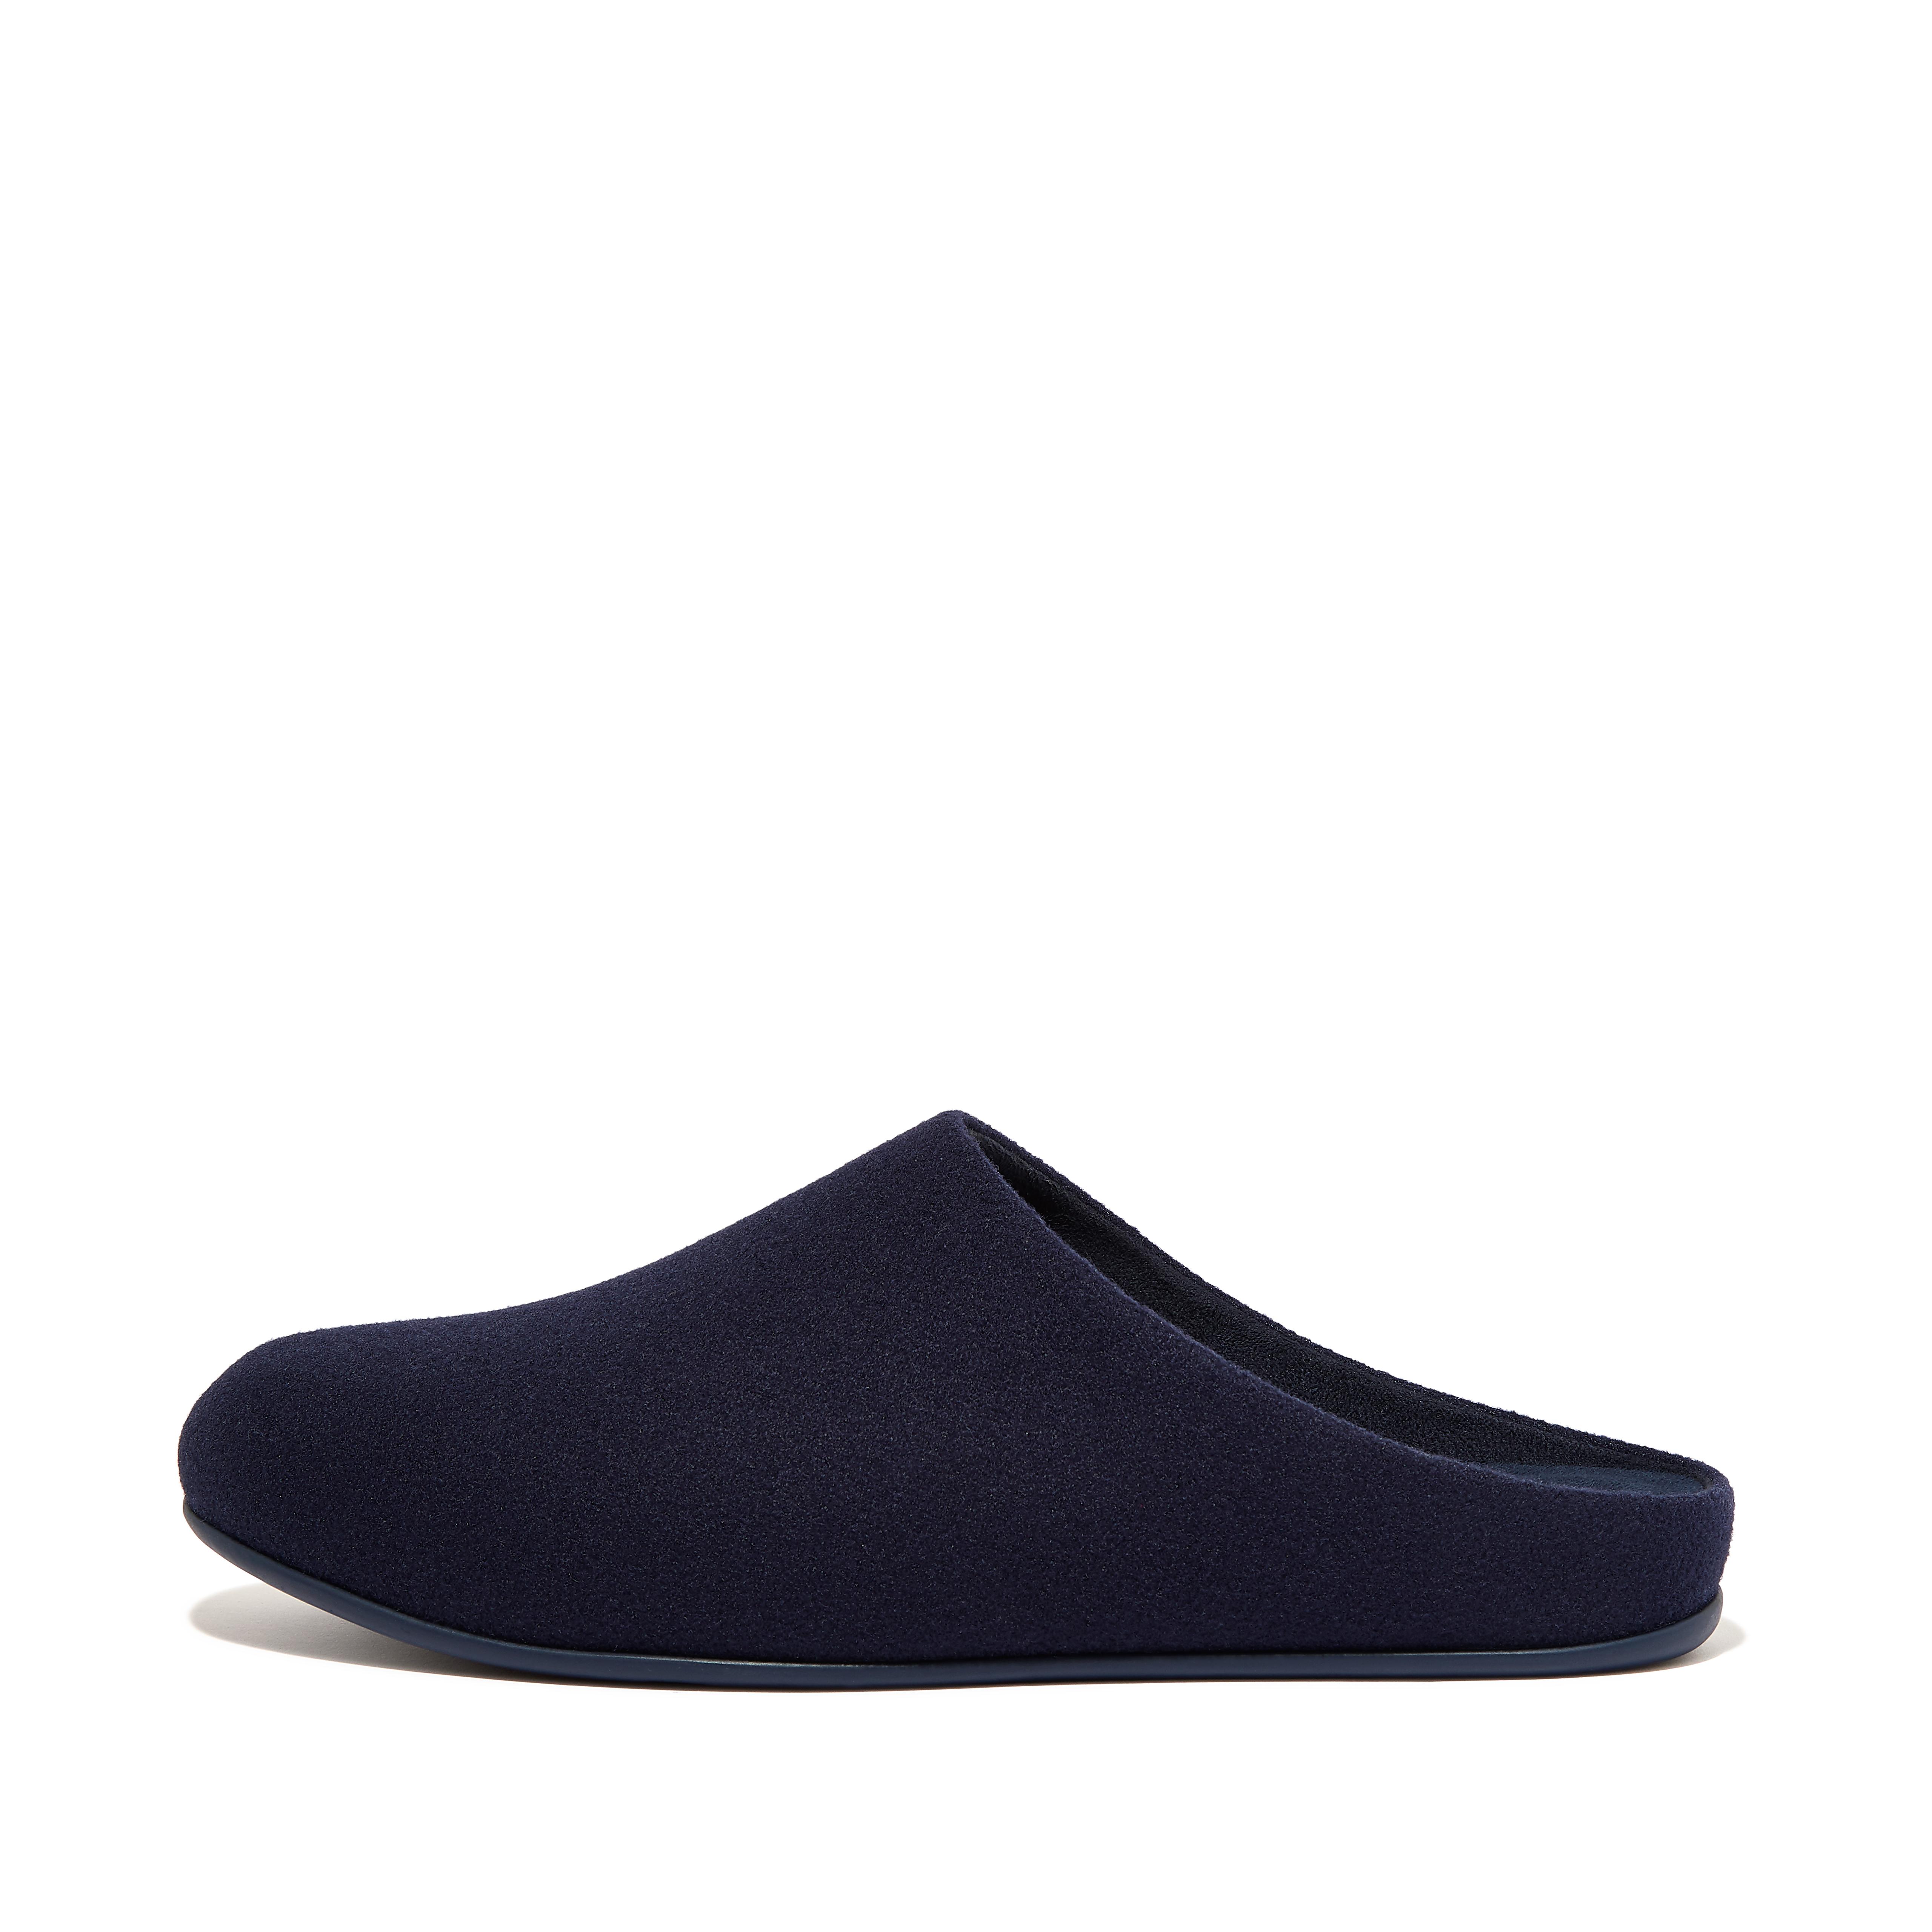 Fitflop Mens Felt Slippers,All Navy